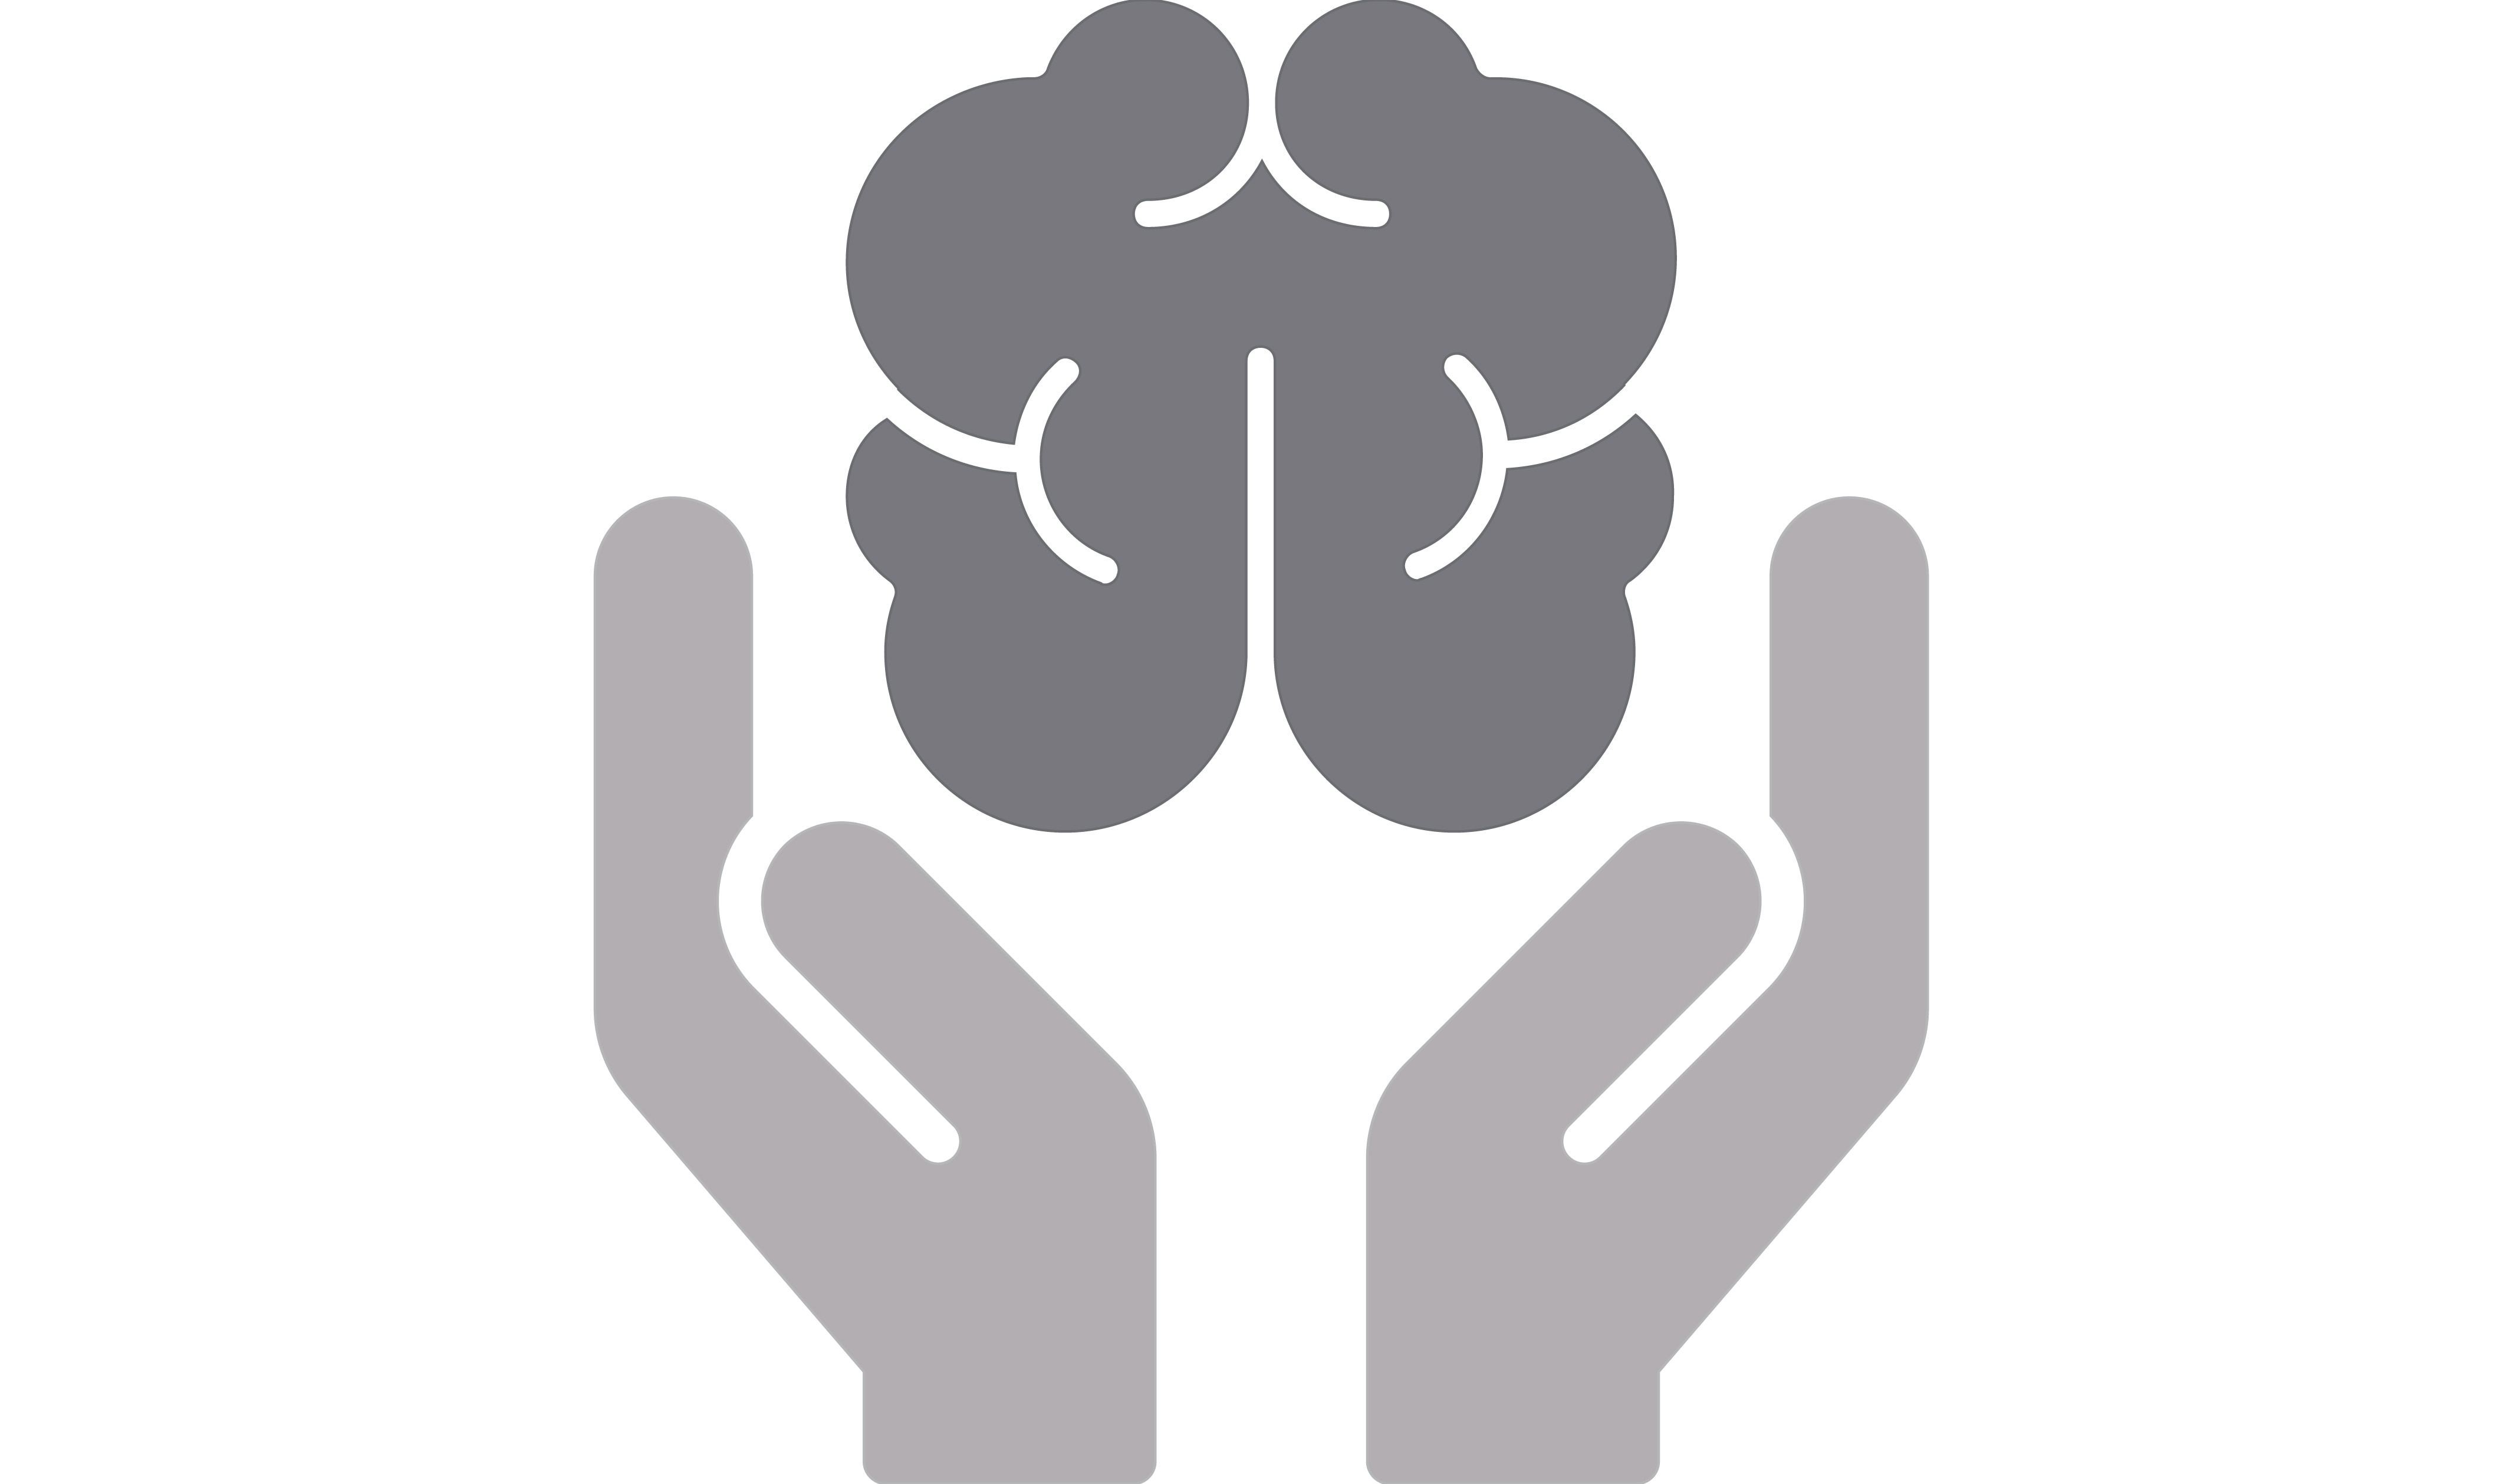 An icon of hands surrounding a brain, caring for mental health imagery